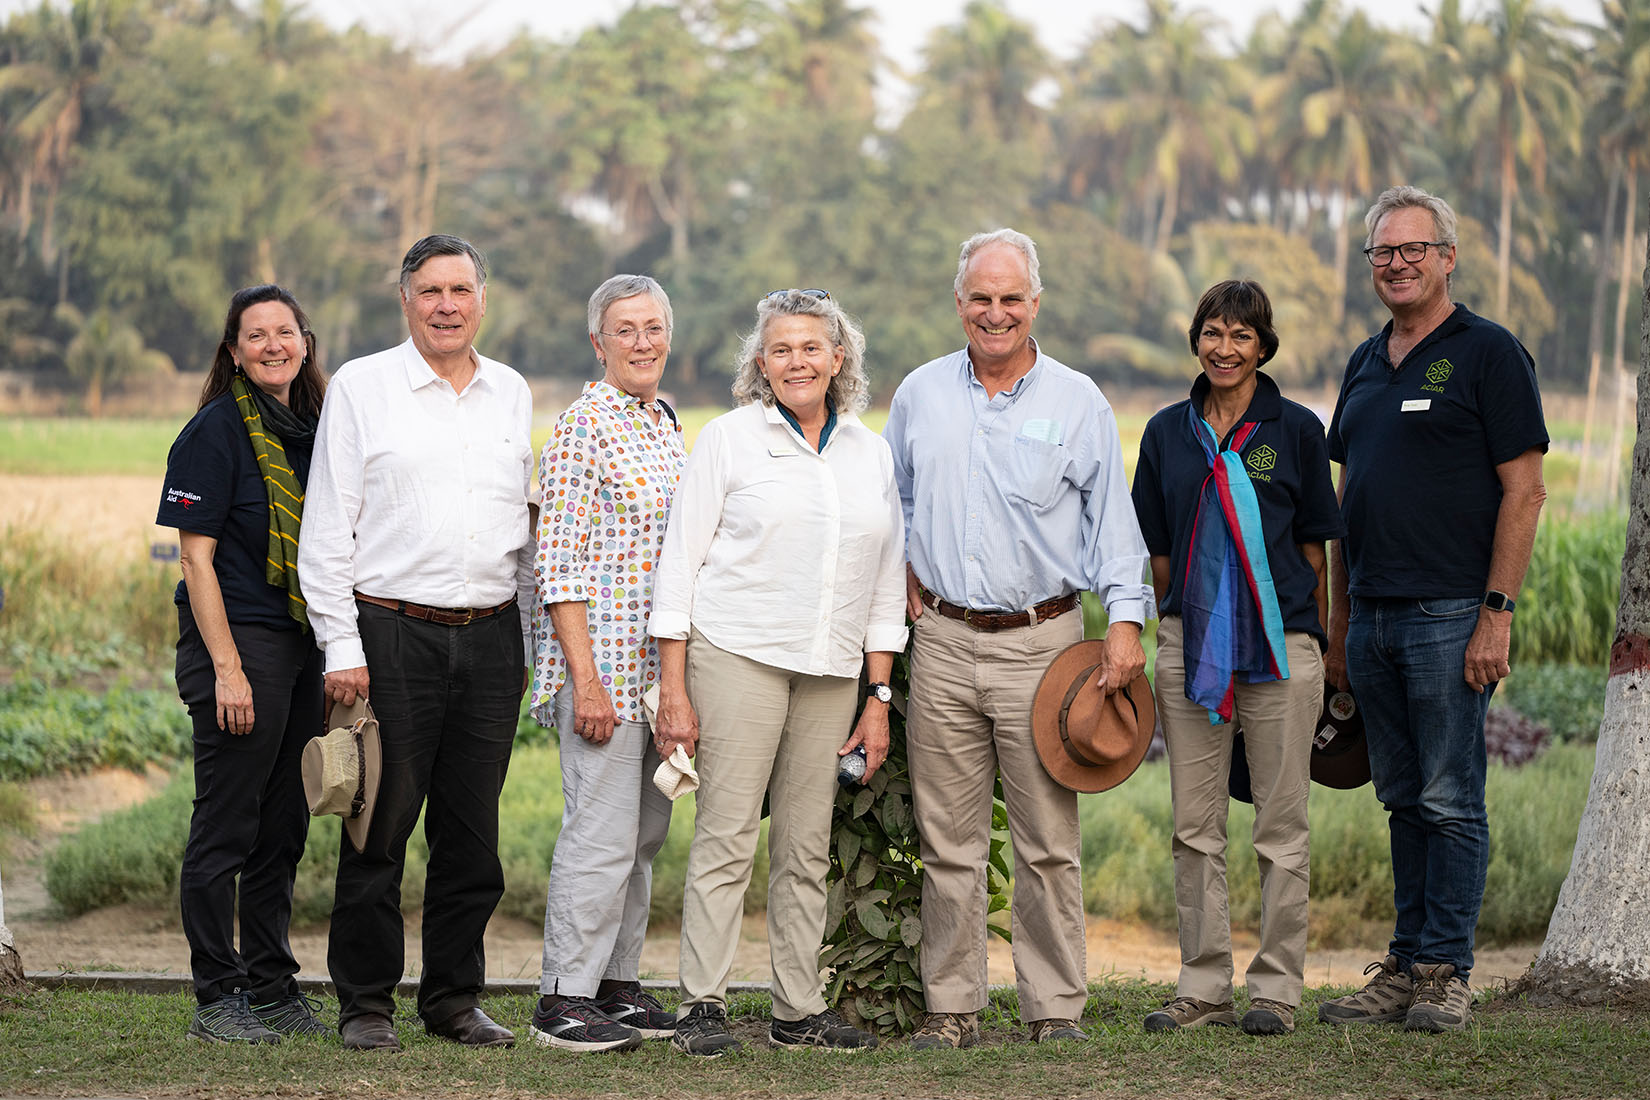 Seven people standing side by side, smiling at the camera, with trees and vegetation blurred in the background.